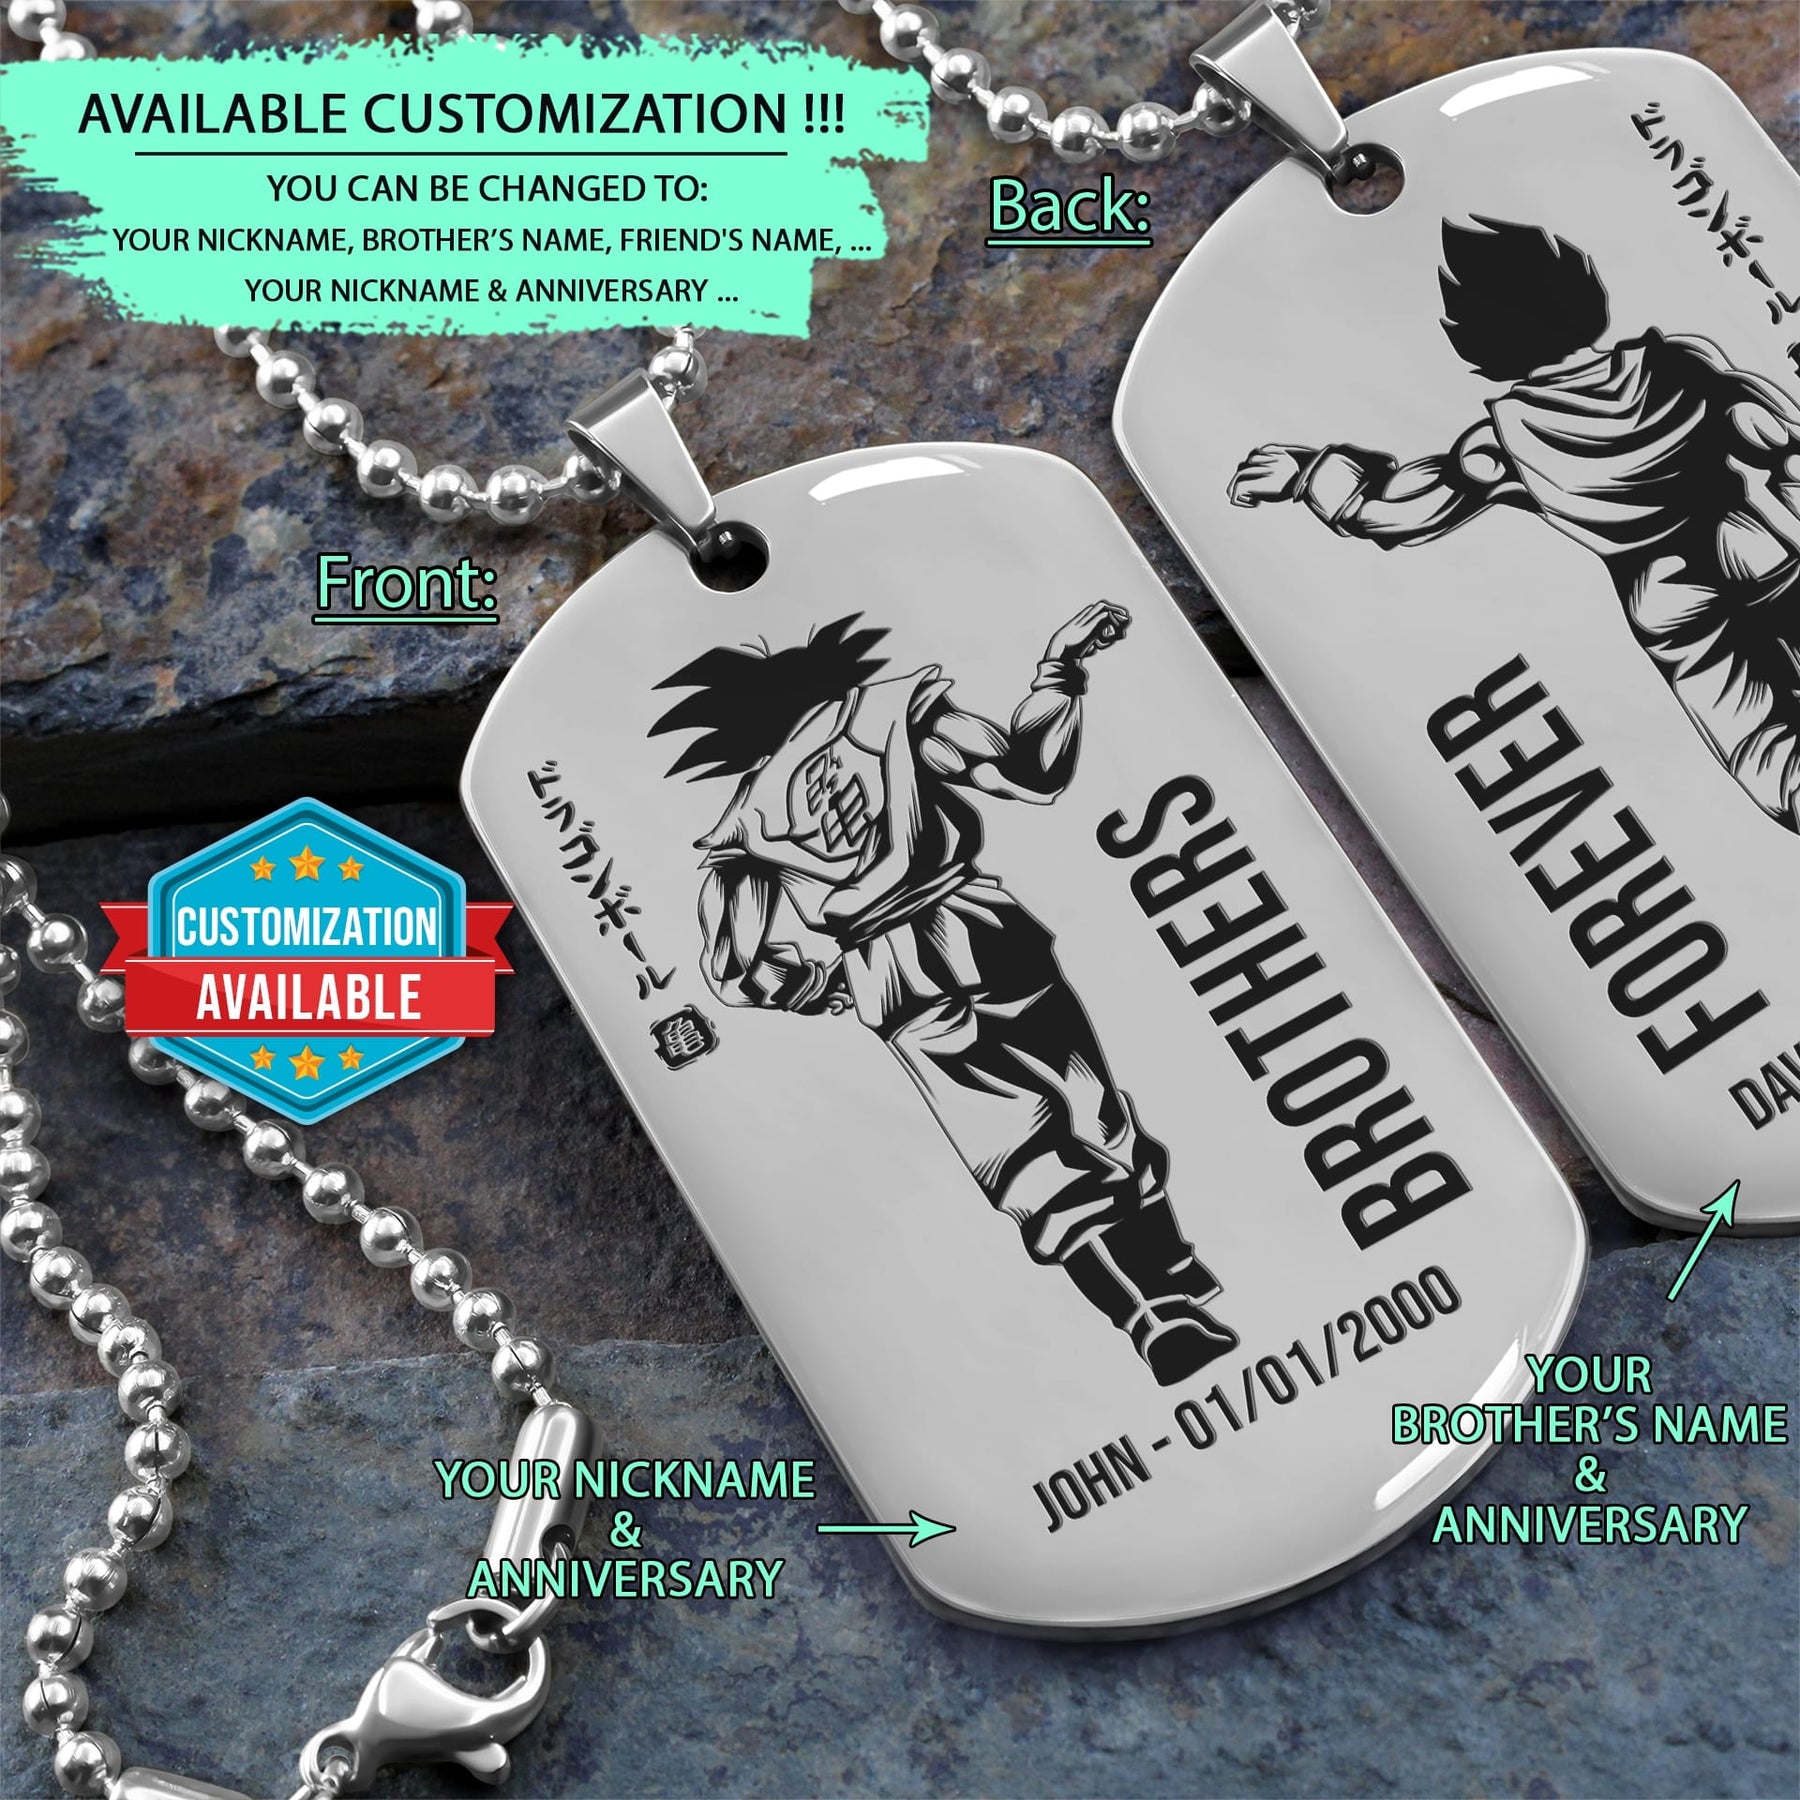 DRD040 - Brothers Forever - Goku - Vegeta - Dragon Ball Dog Tag - Double Sided Engraved Silver Dog Tag